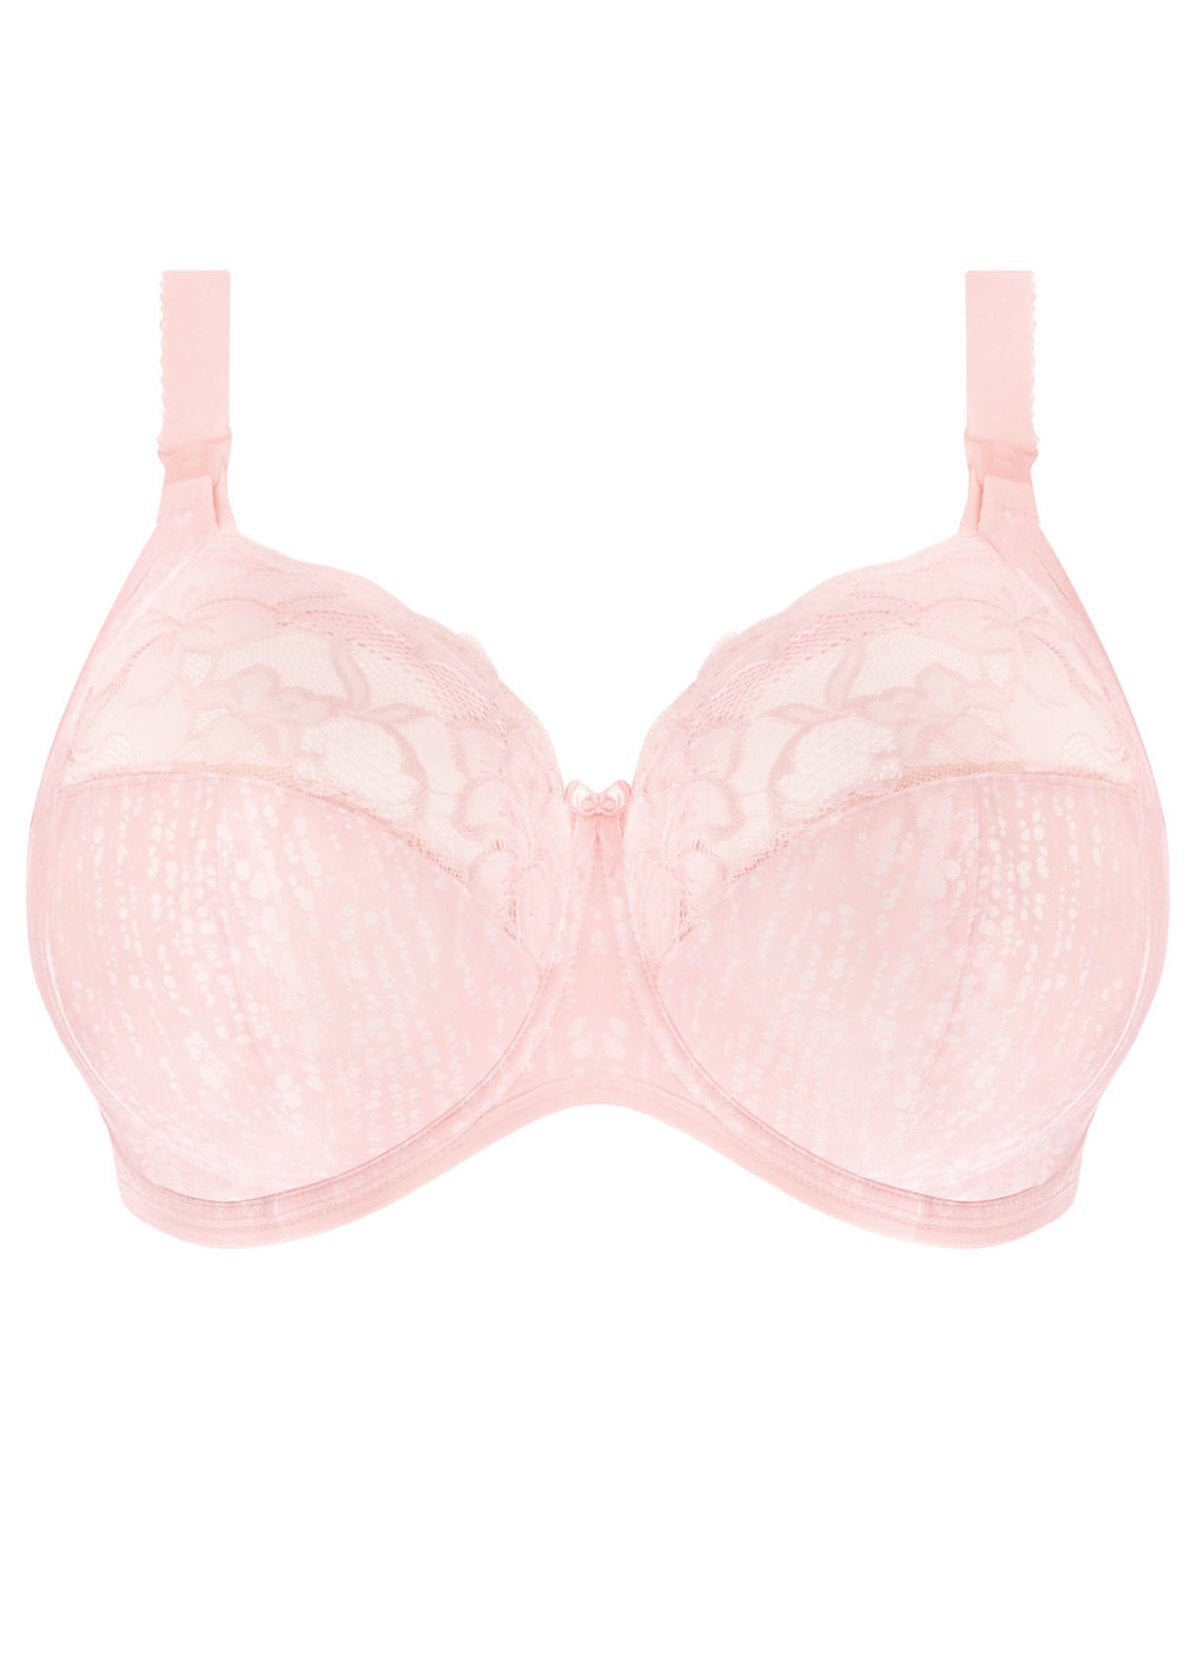 product view of Elomi Molly Underwire Nursing Bra in blush at Belle Lacet lingerie